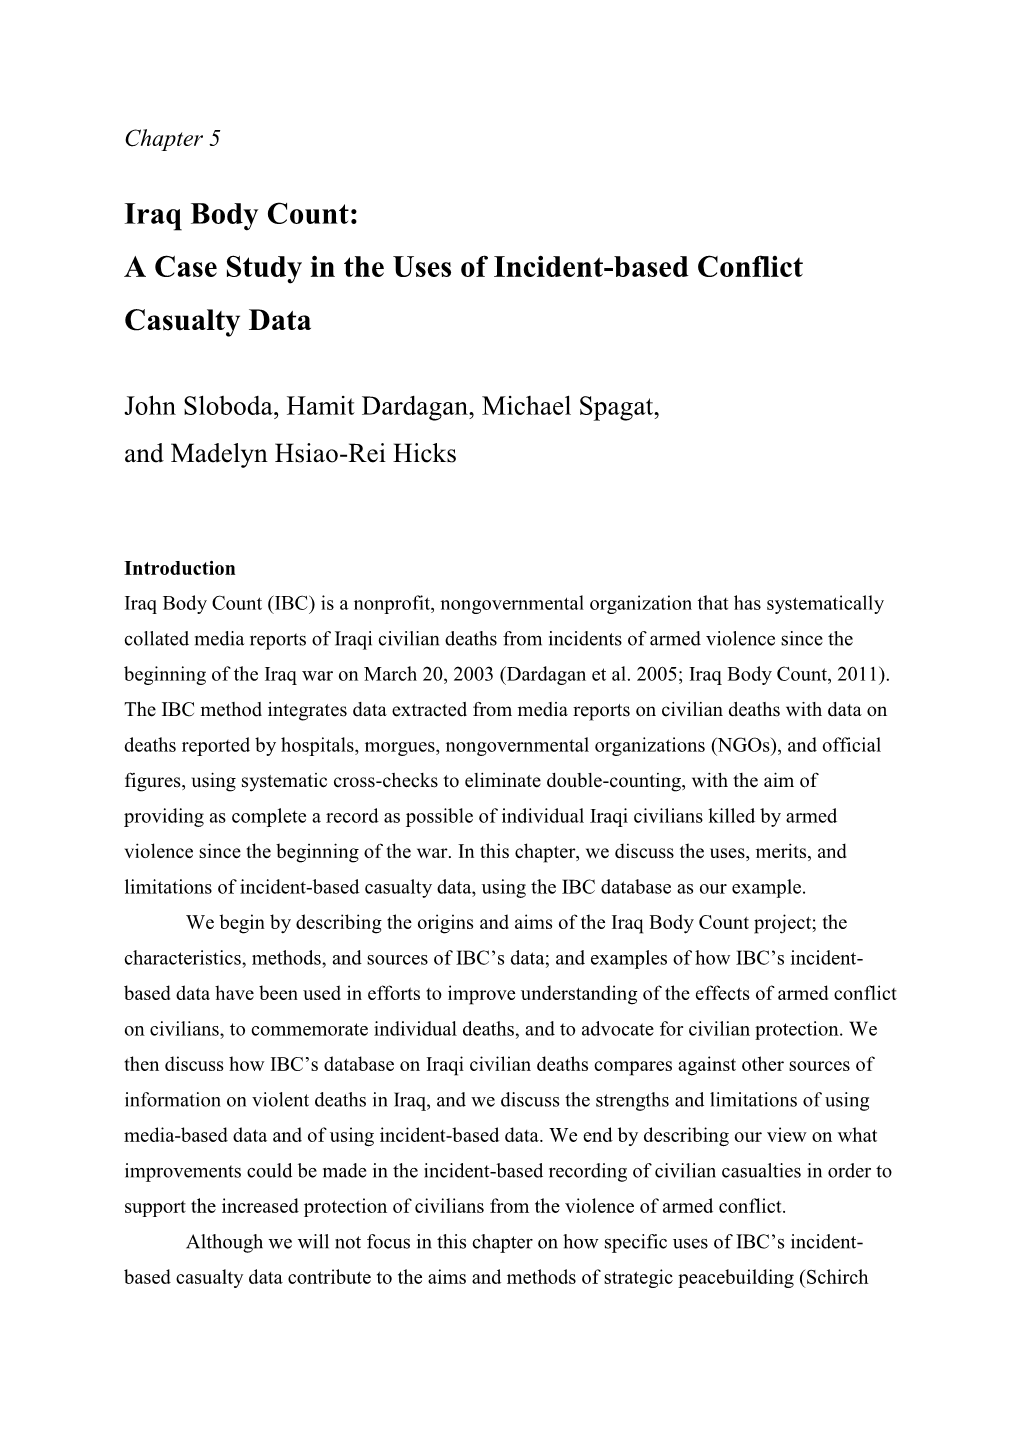 Iraq Body Count As a Case Study in the Use Of